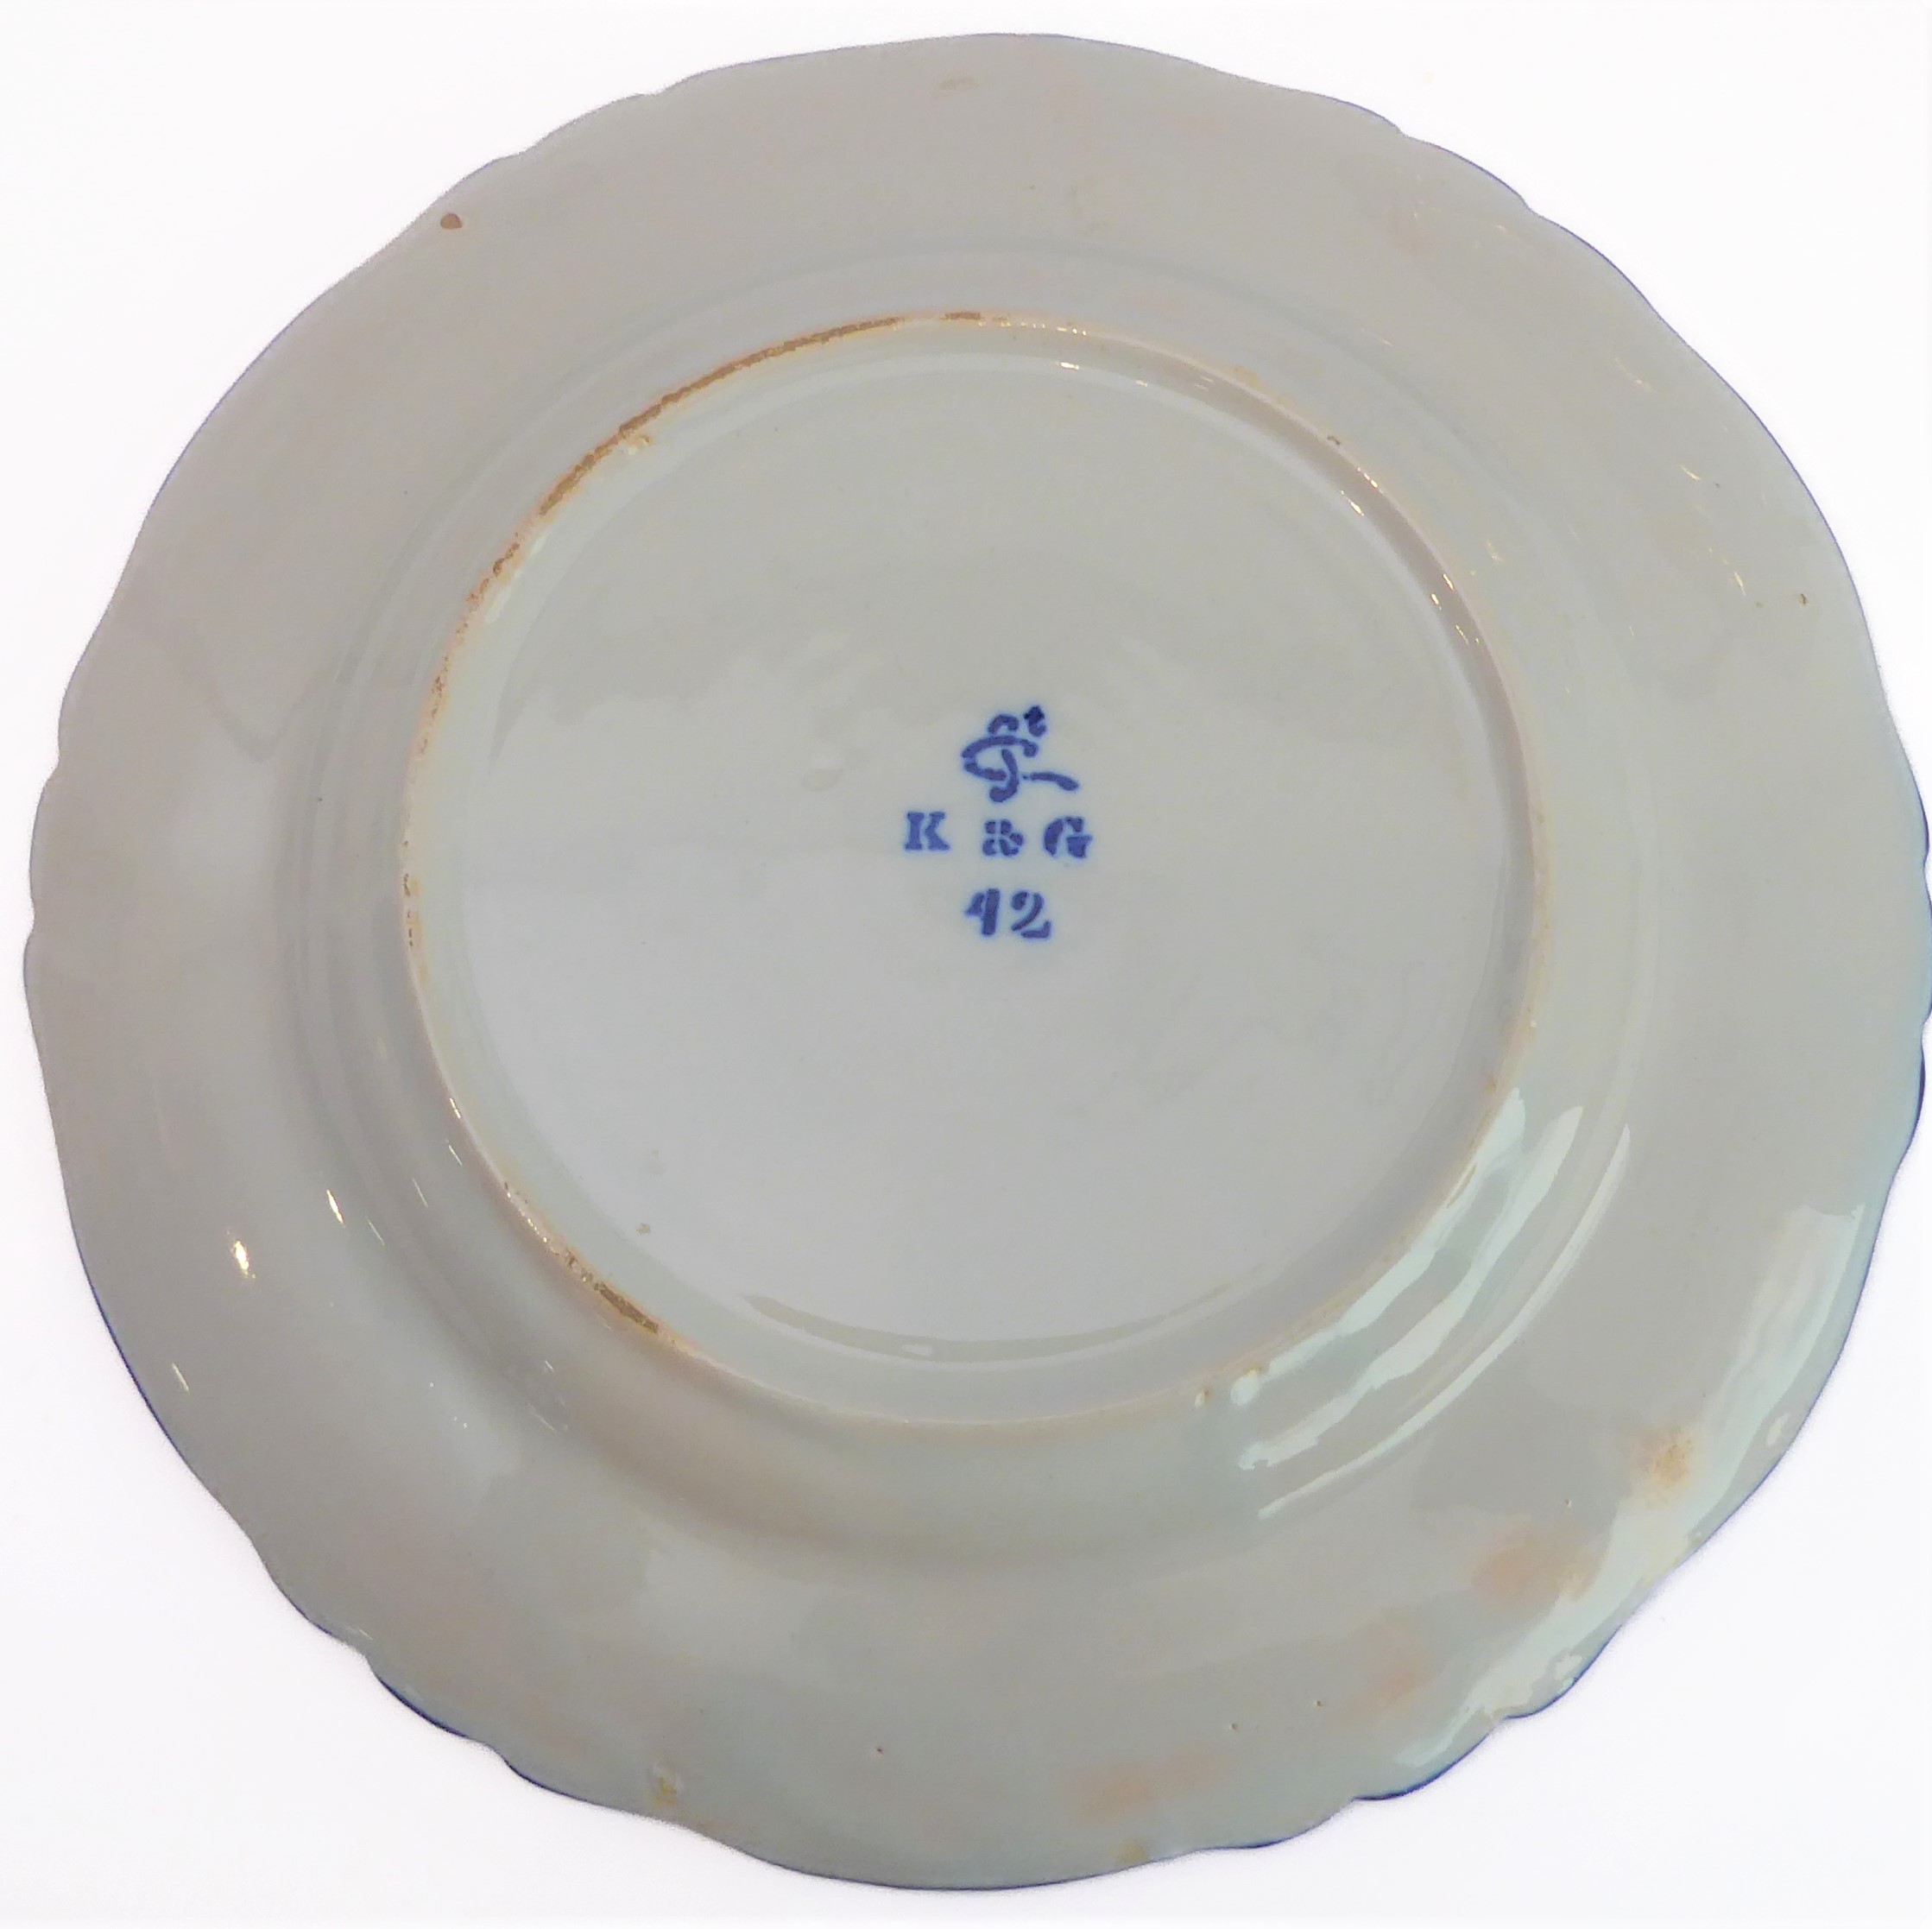 A set of eleven 19th century faience plates by Keller & Guerin at Luneville (early marks). (The - Image 3 of 17